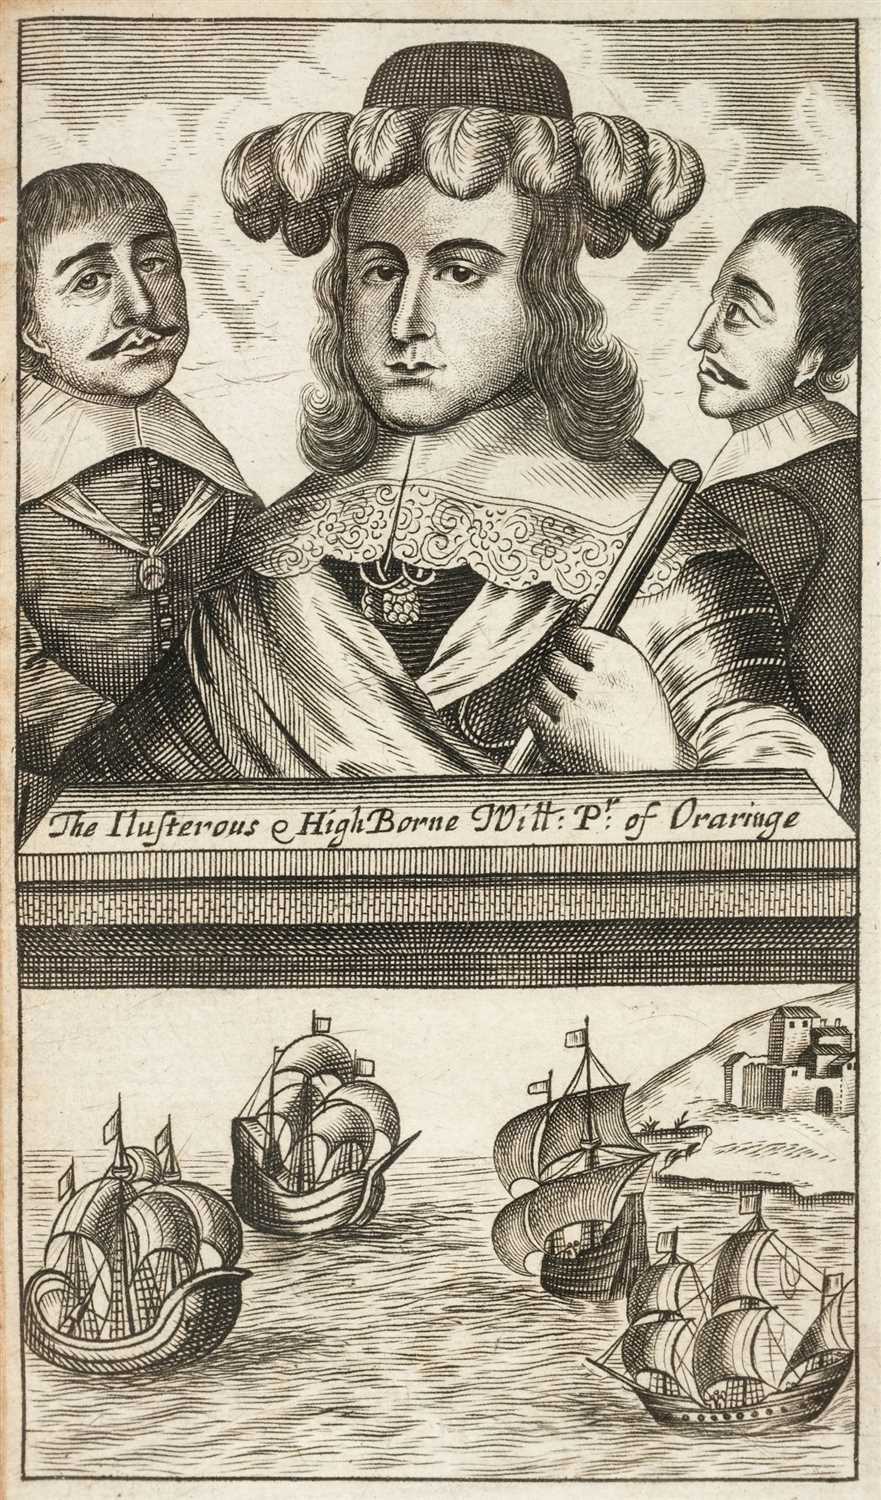 Lot 31 - Netherlands. The Dutch Drawn to the Life, 1664